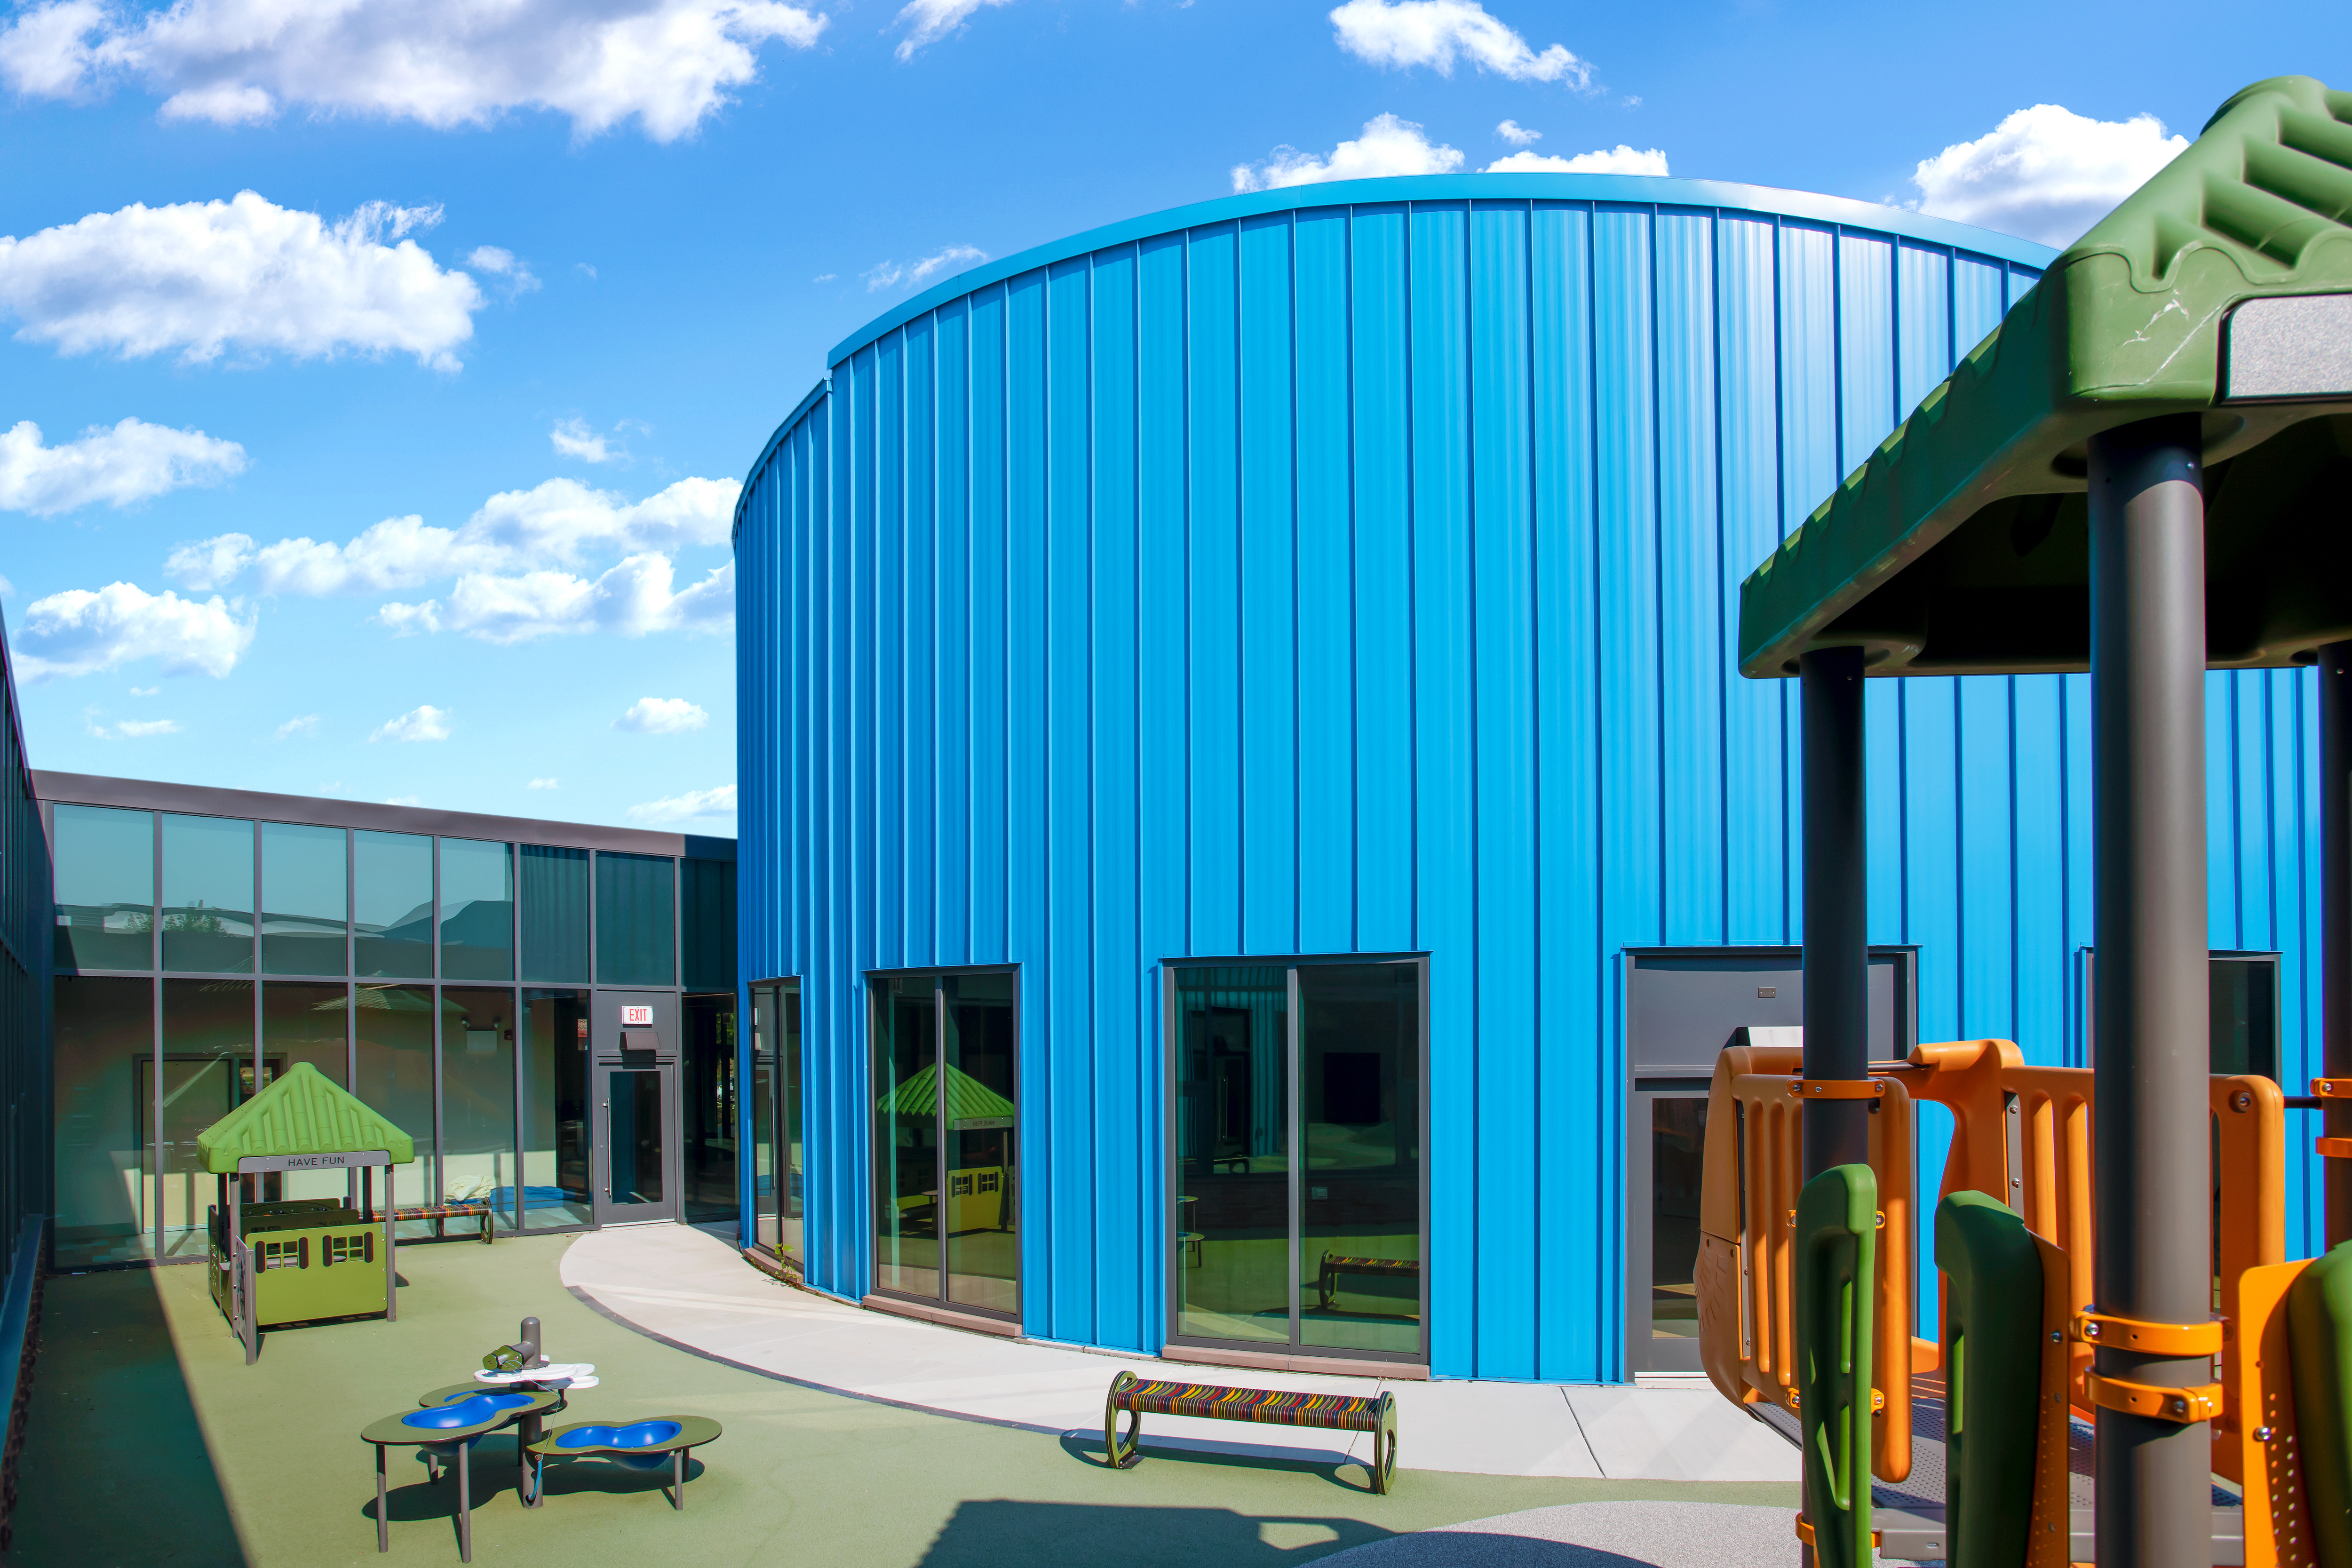 Playful sections of bright blue metal roof welcome visitors to the Altgeld Family Resource Center on Chicago’s far South Side. Photo: hortonphotoinc.com